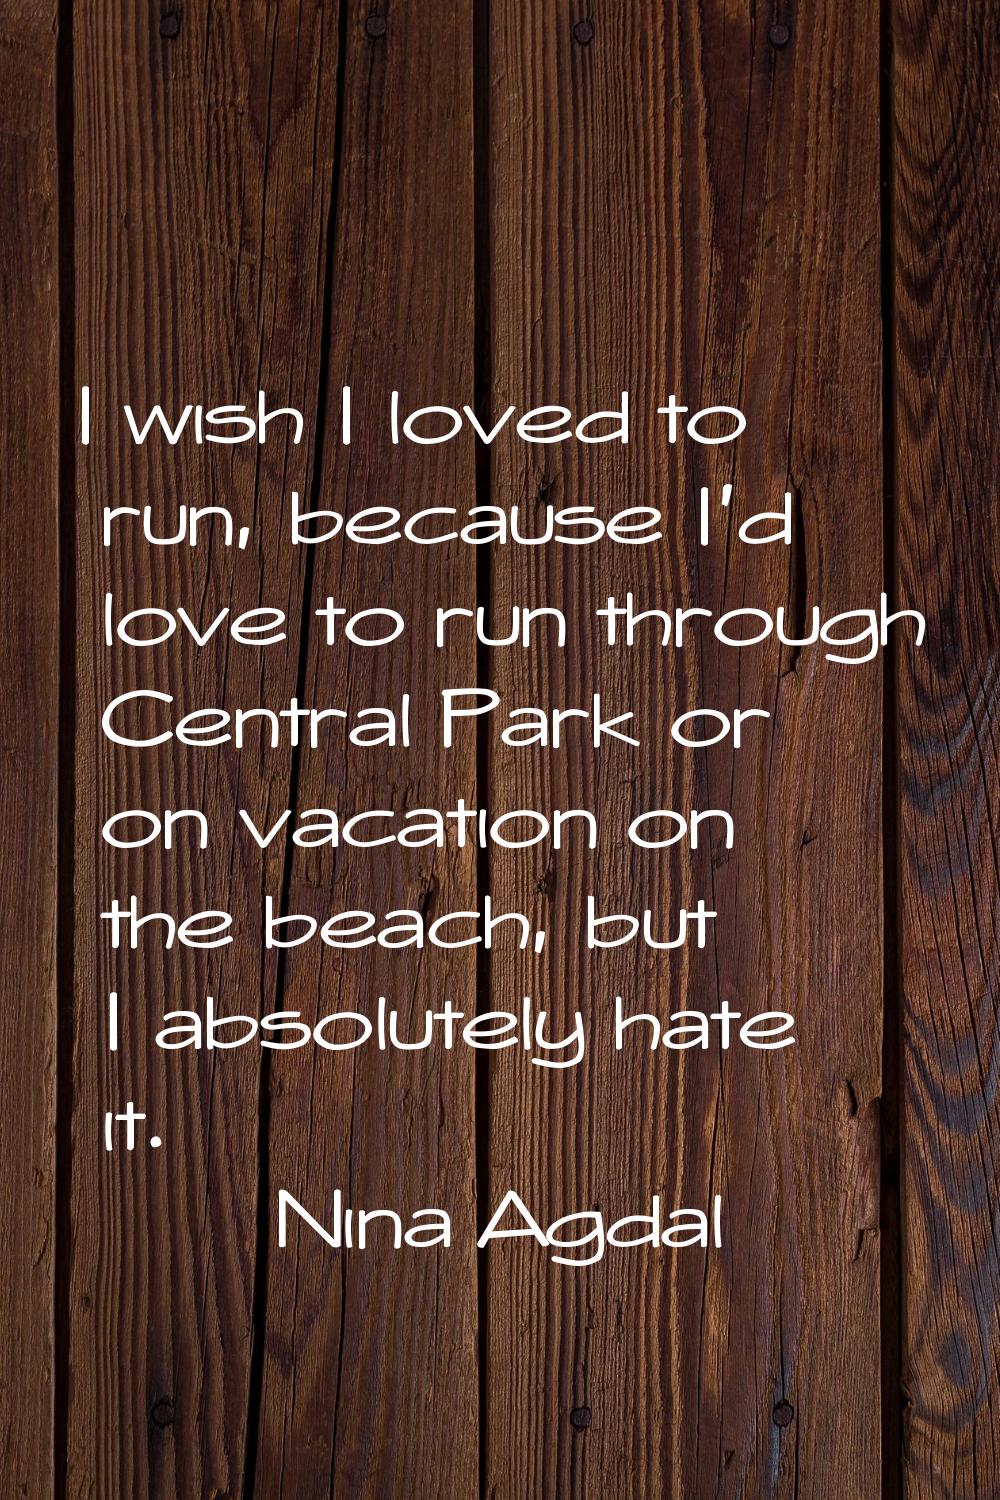 I wish I loved to run, because I'd love to run through Central Park or on vacation on the beach, bu